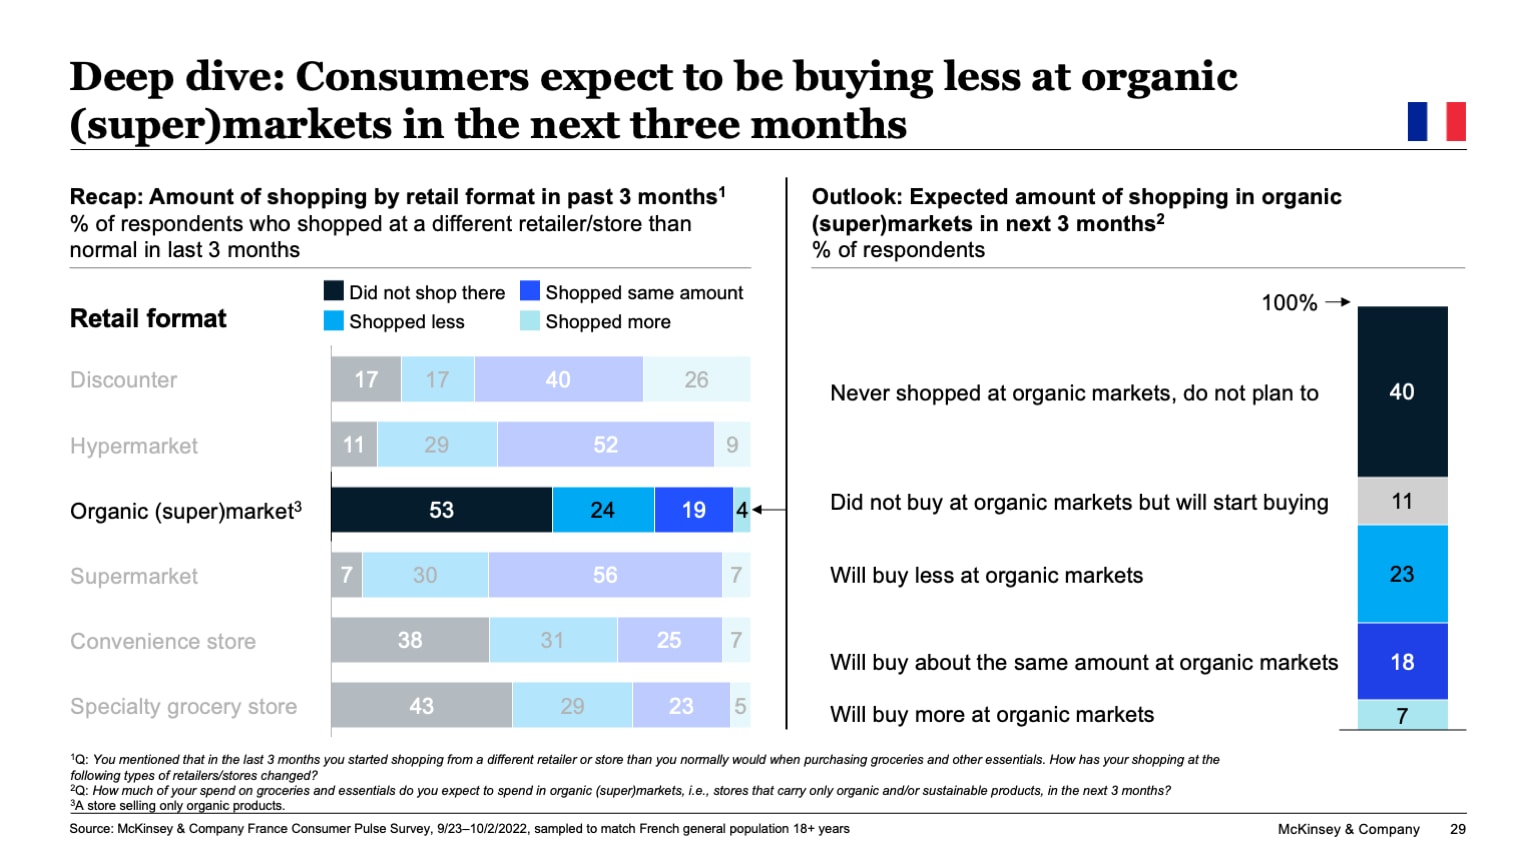 Deep dive: Consumers expect to be buying less at organic (super)markets in the next three months